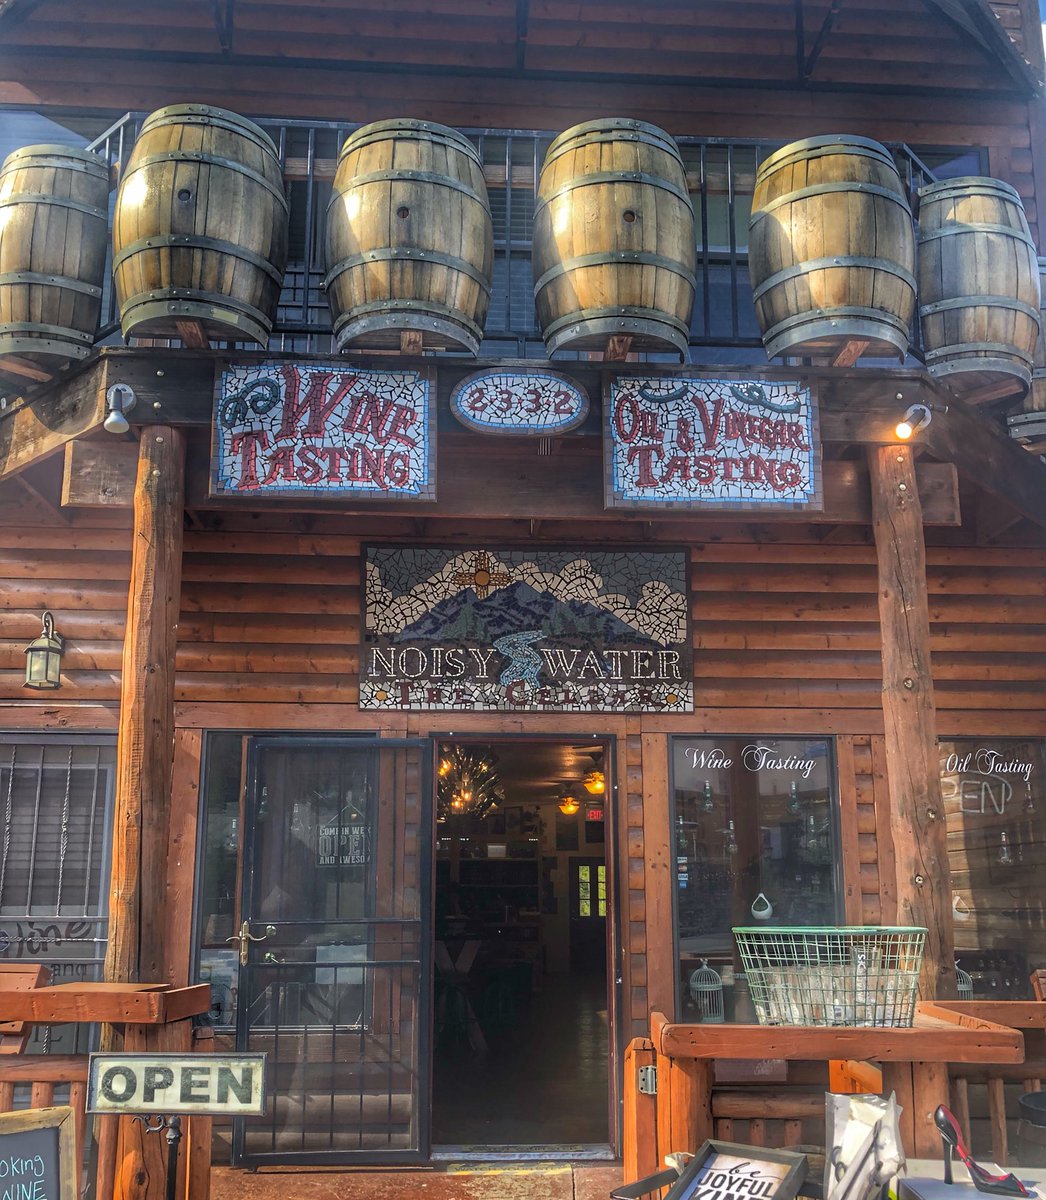 Downtown Ruidoso is adorable. How cute is #noisywaterwinery? They have a very popular white called Tighty Whitey White. 😜😋 #southernNM #newmexicotrue #travel